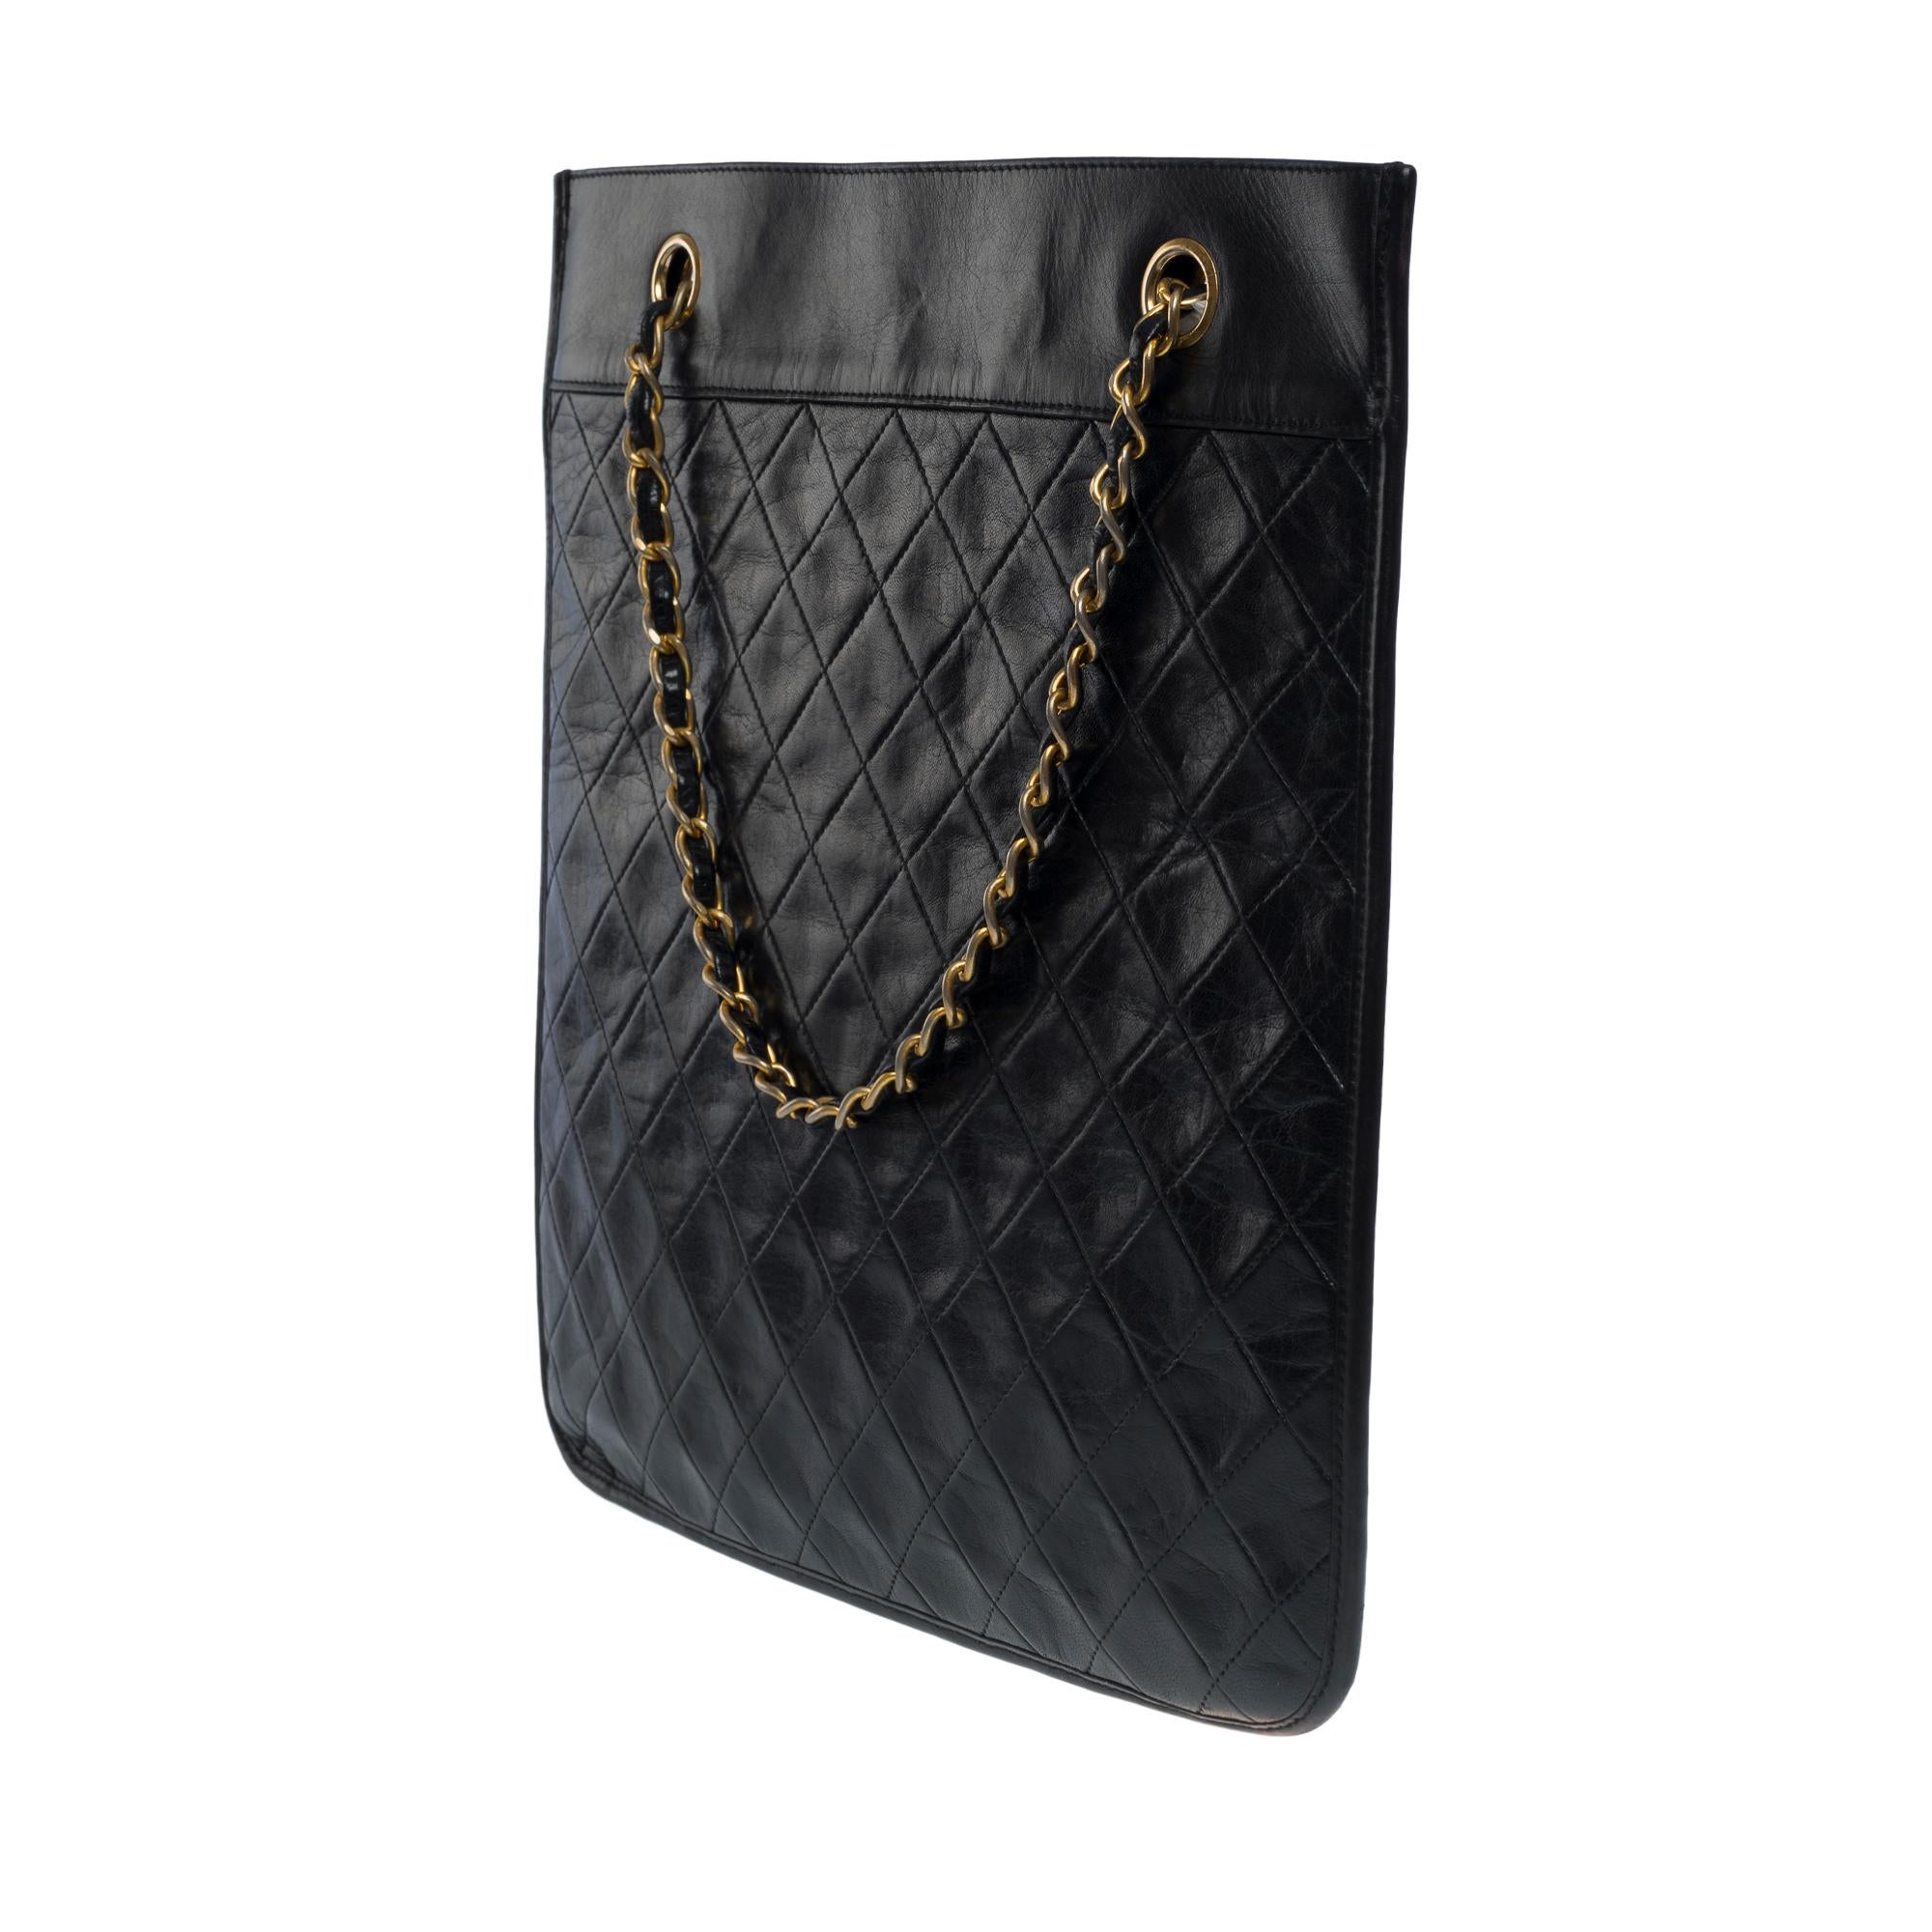 Women's Gorgeous Chanel Flat Tote bag in black quilted lambskin leather , GHW